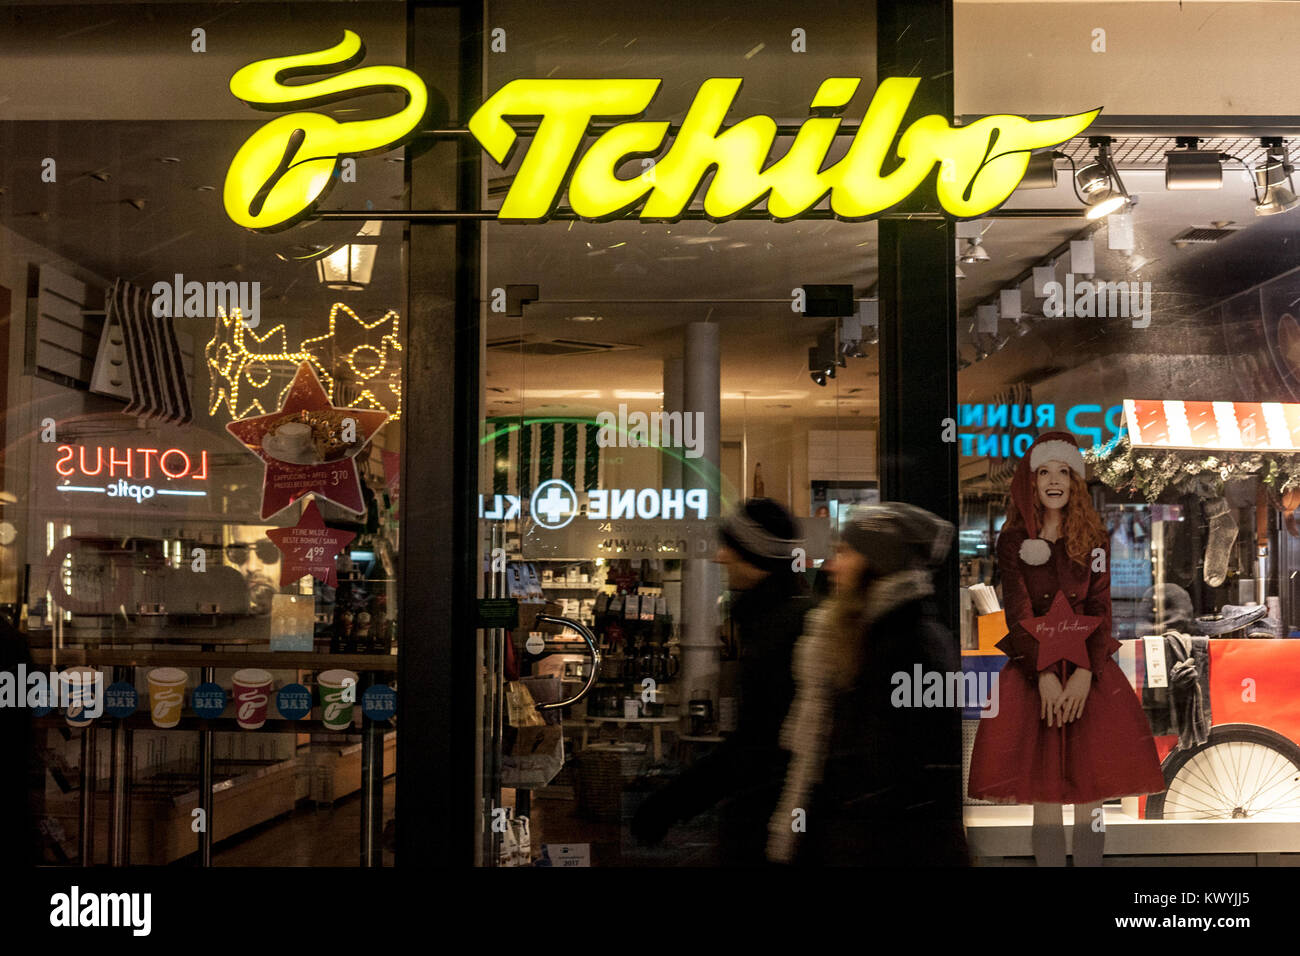 MUNICH, GERMANY - DECEMBER 17, 2017: Tchibo logo on their Munich main shop  taken at night. Tchibo is a German chain of coffee retailers and cafés know  Stock Photo - Alamy